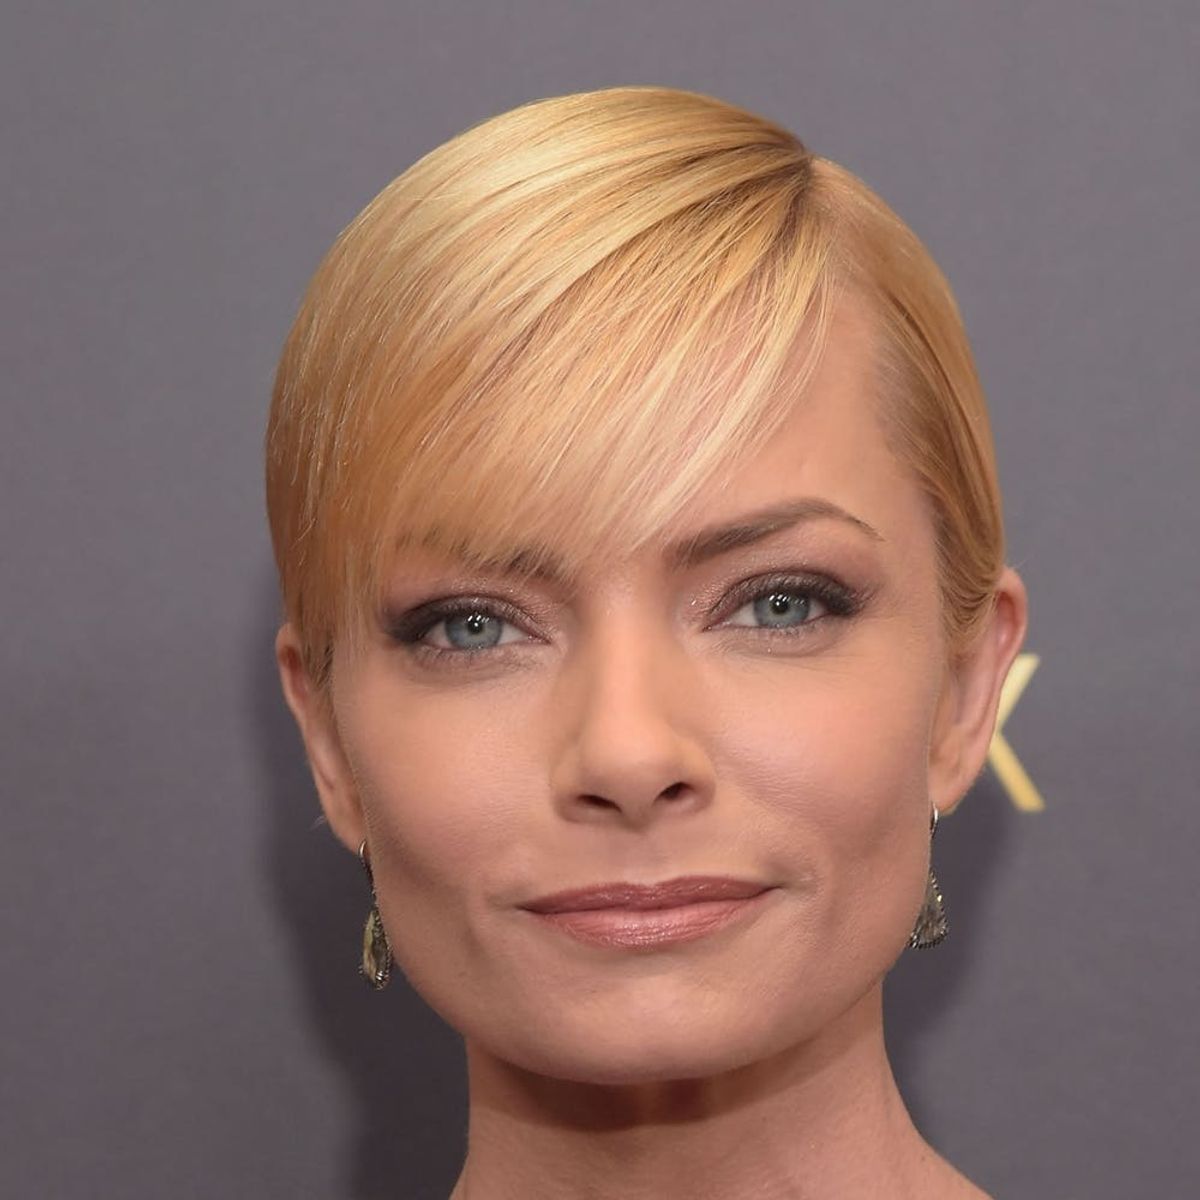 Jaime Pressly Is the Latest Celeb to Be Burglarized in a Possible Organized Hollywood Crime Spree